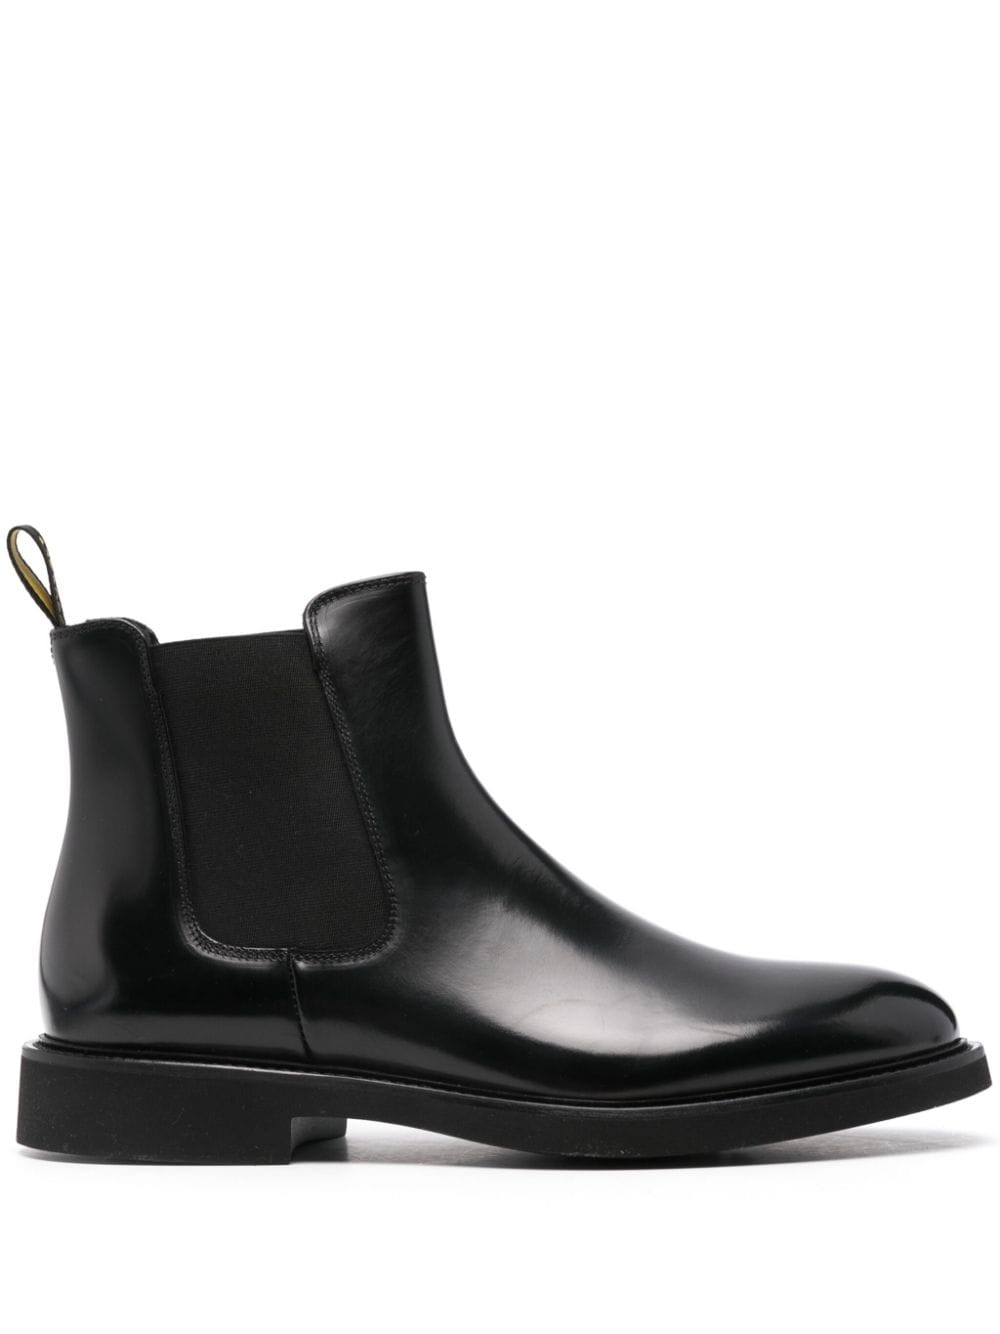 Doucal's leather ankle boots - Black von Doucal's